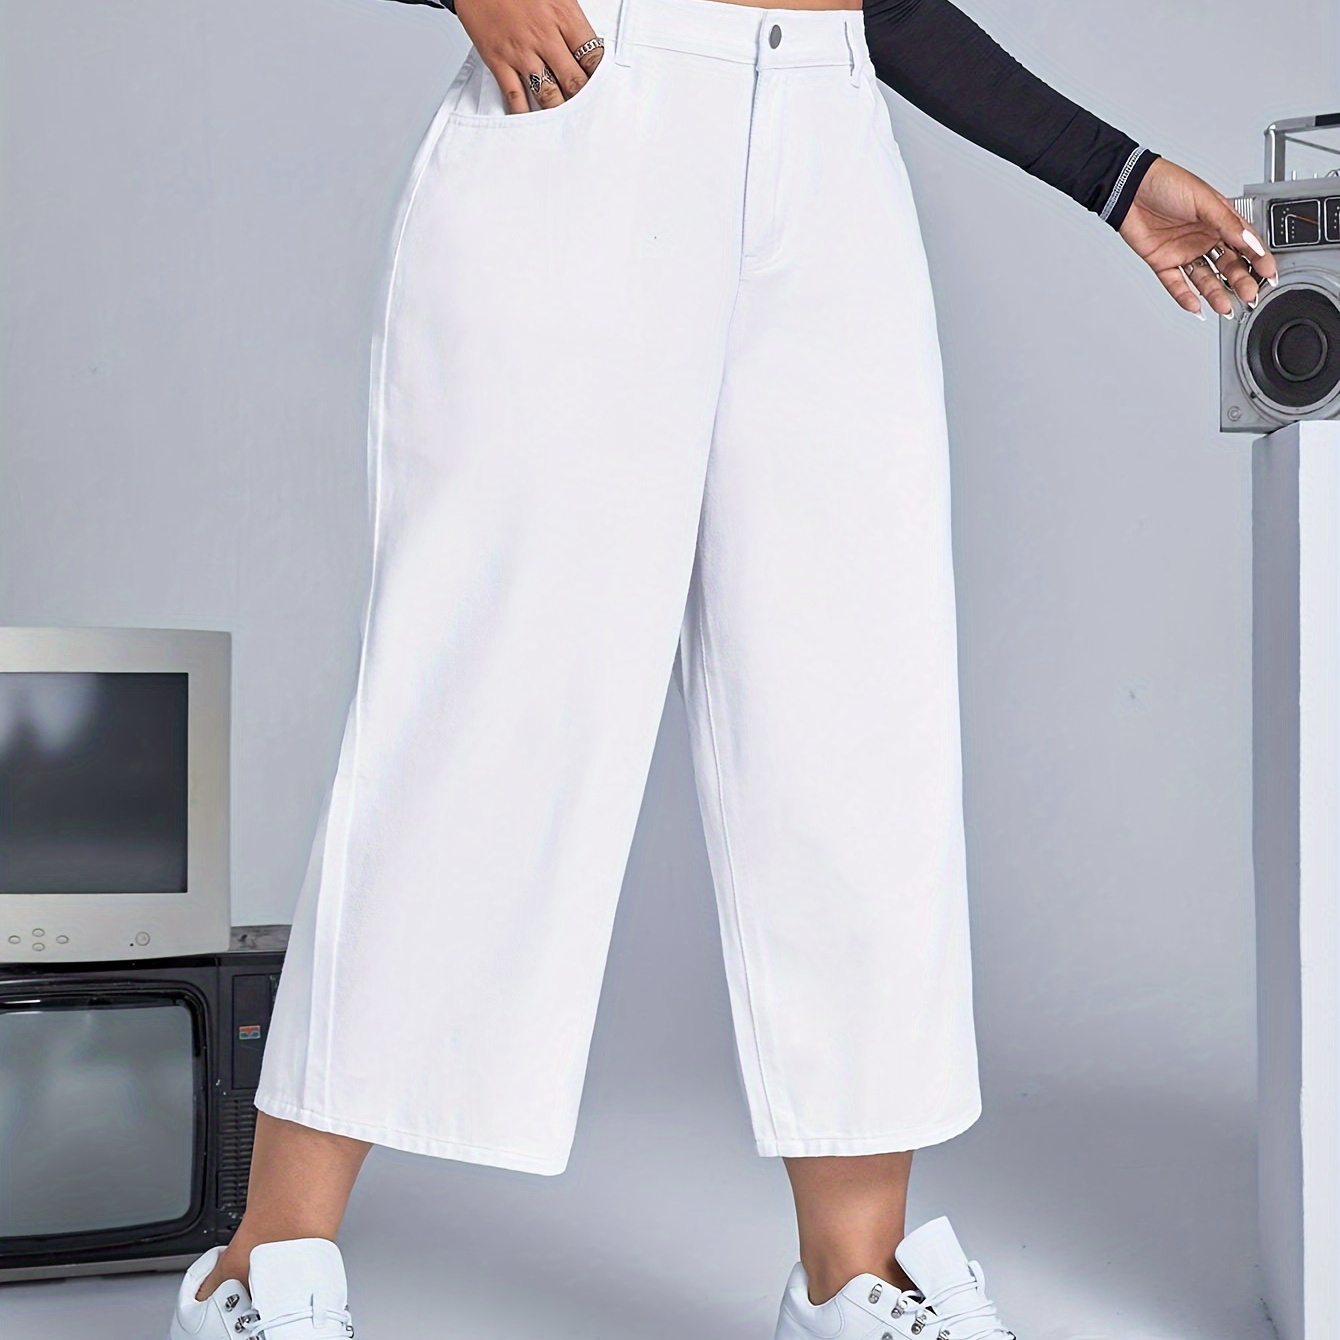 

Women's Plus Size Casual White Wide-leg Pants, Loose Fit Palazzo Trousers, Comfortable High-waist Design For Everyday Wear